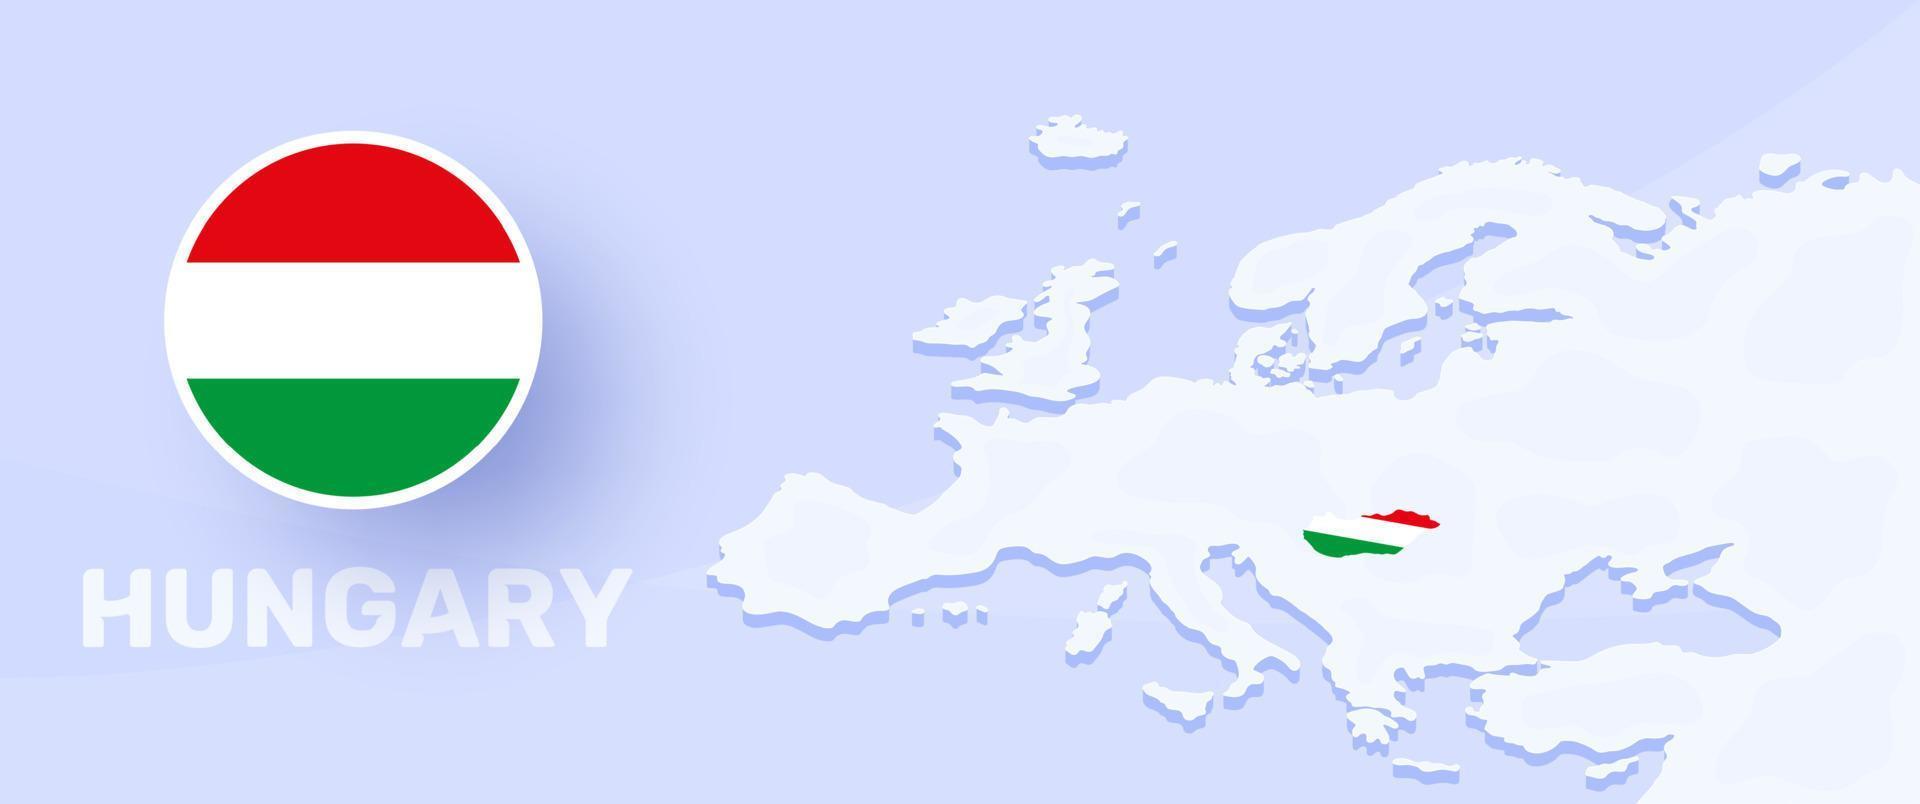 hungary map flag banner. Vector illustration with a map of Europe and highlighted country with national flag